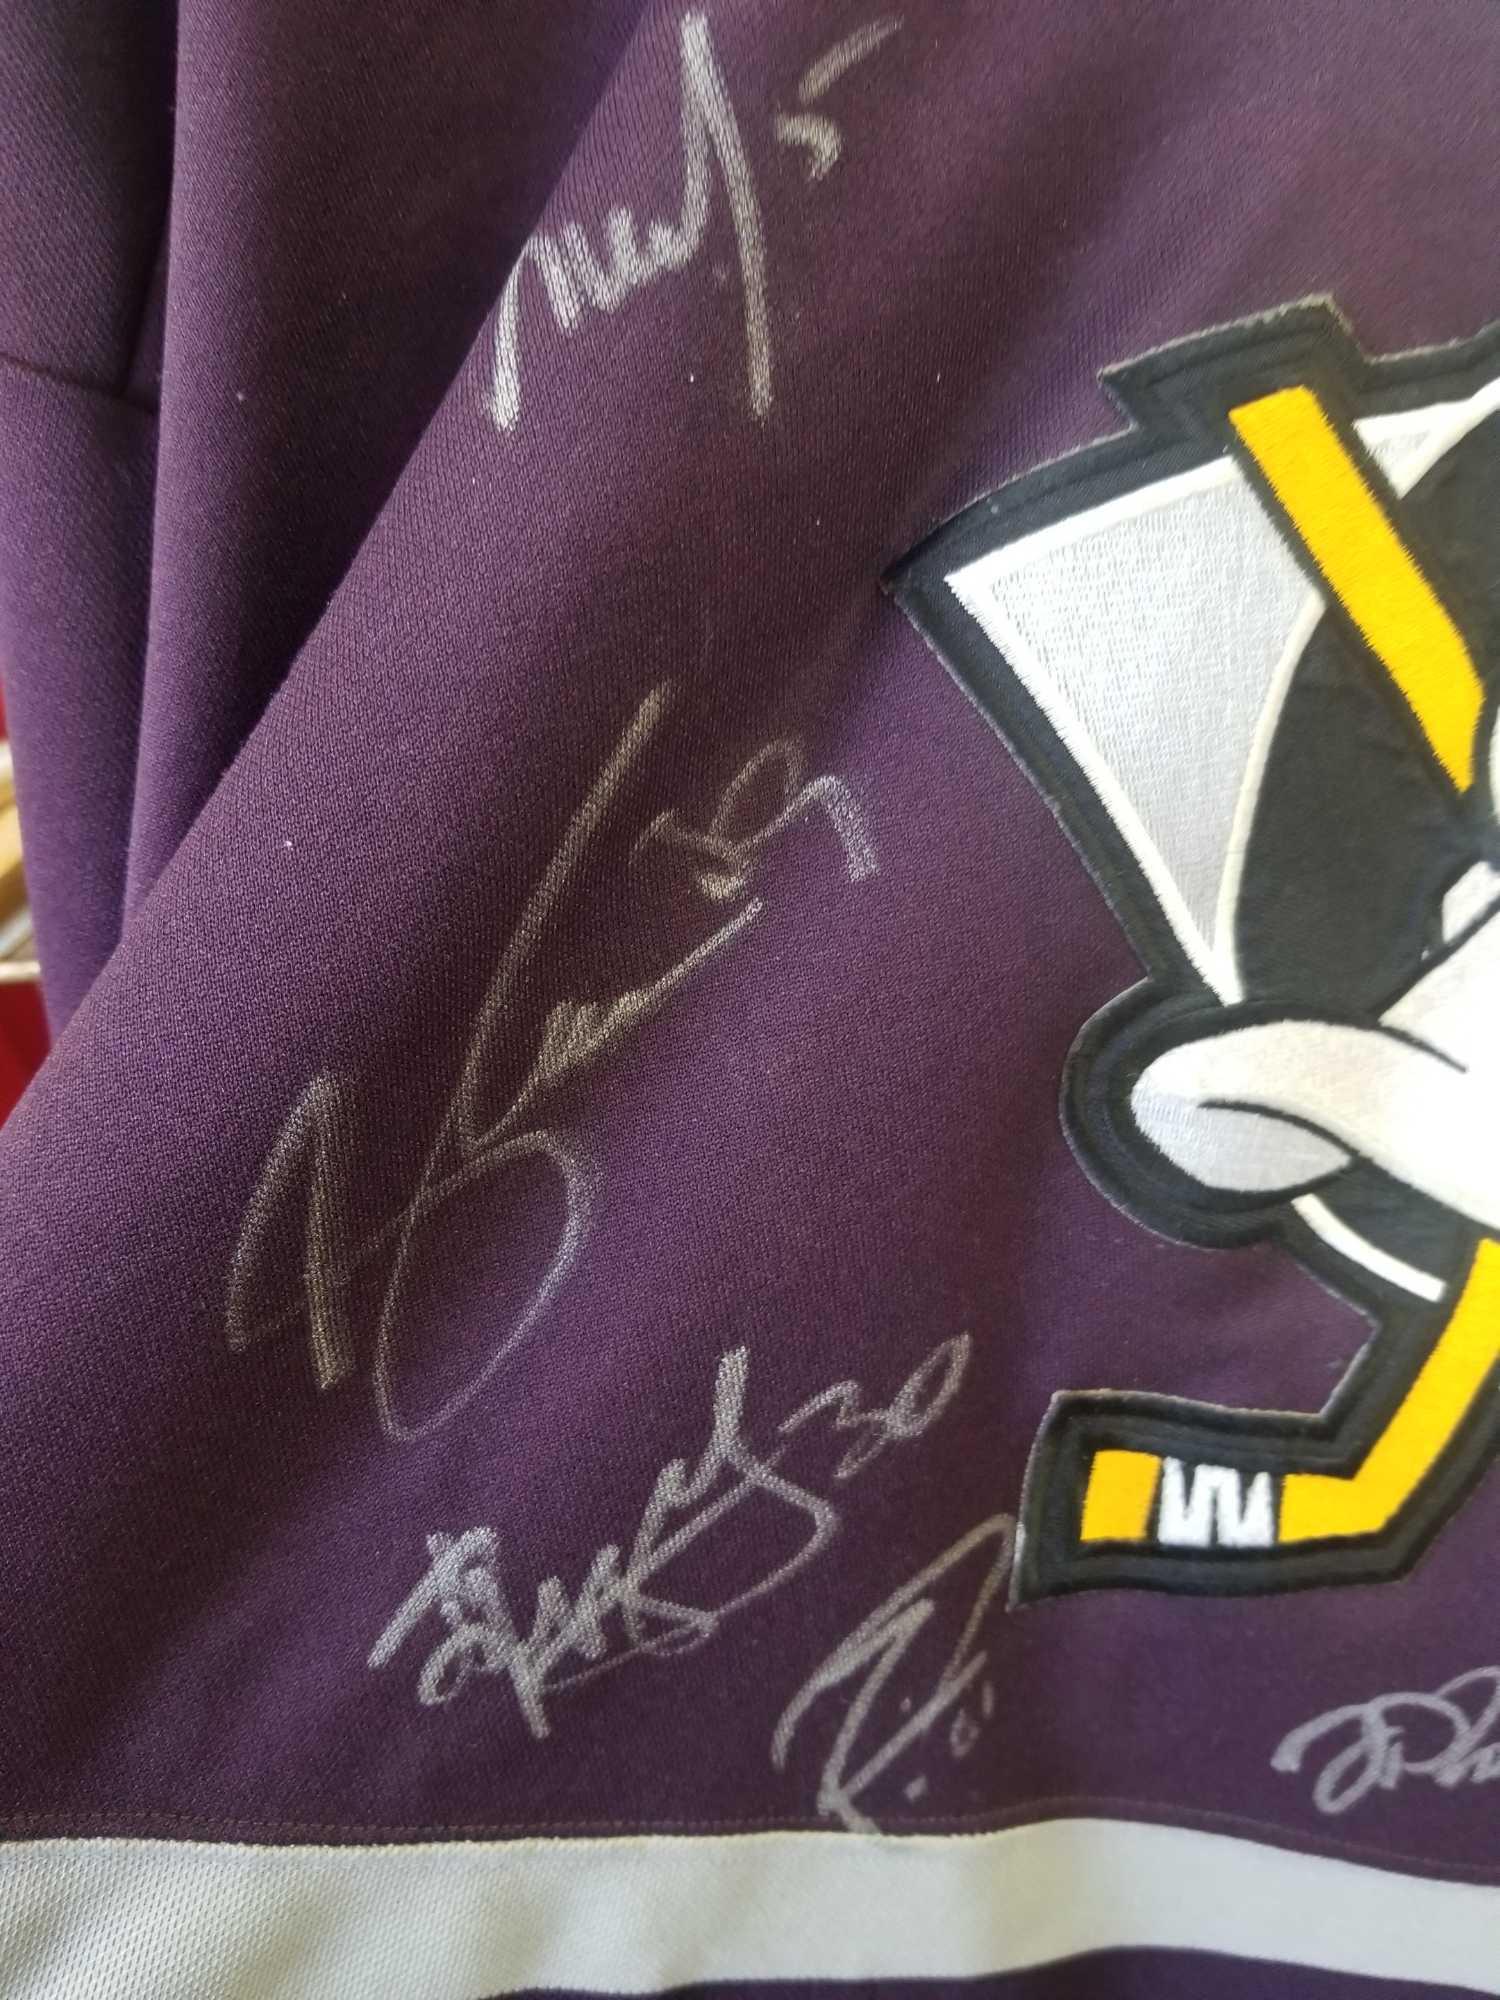 Mighty Ducks Multiple Signed Jersey 16 Sigs